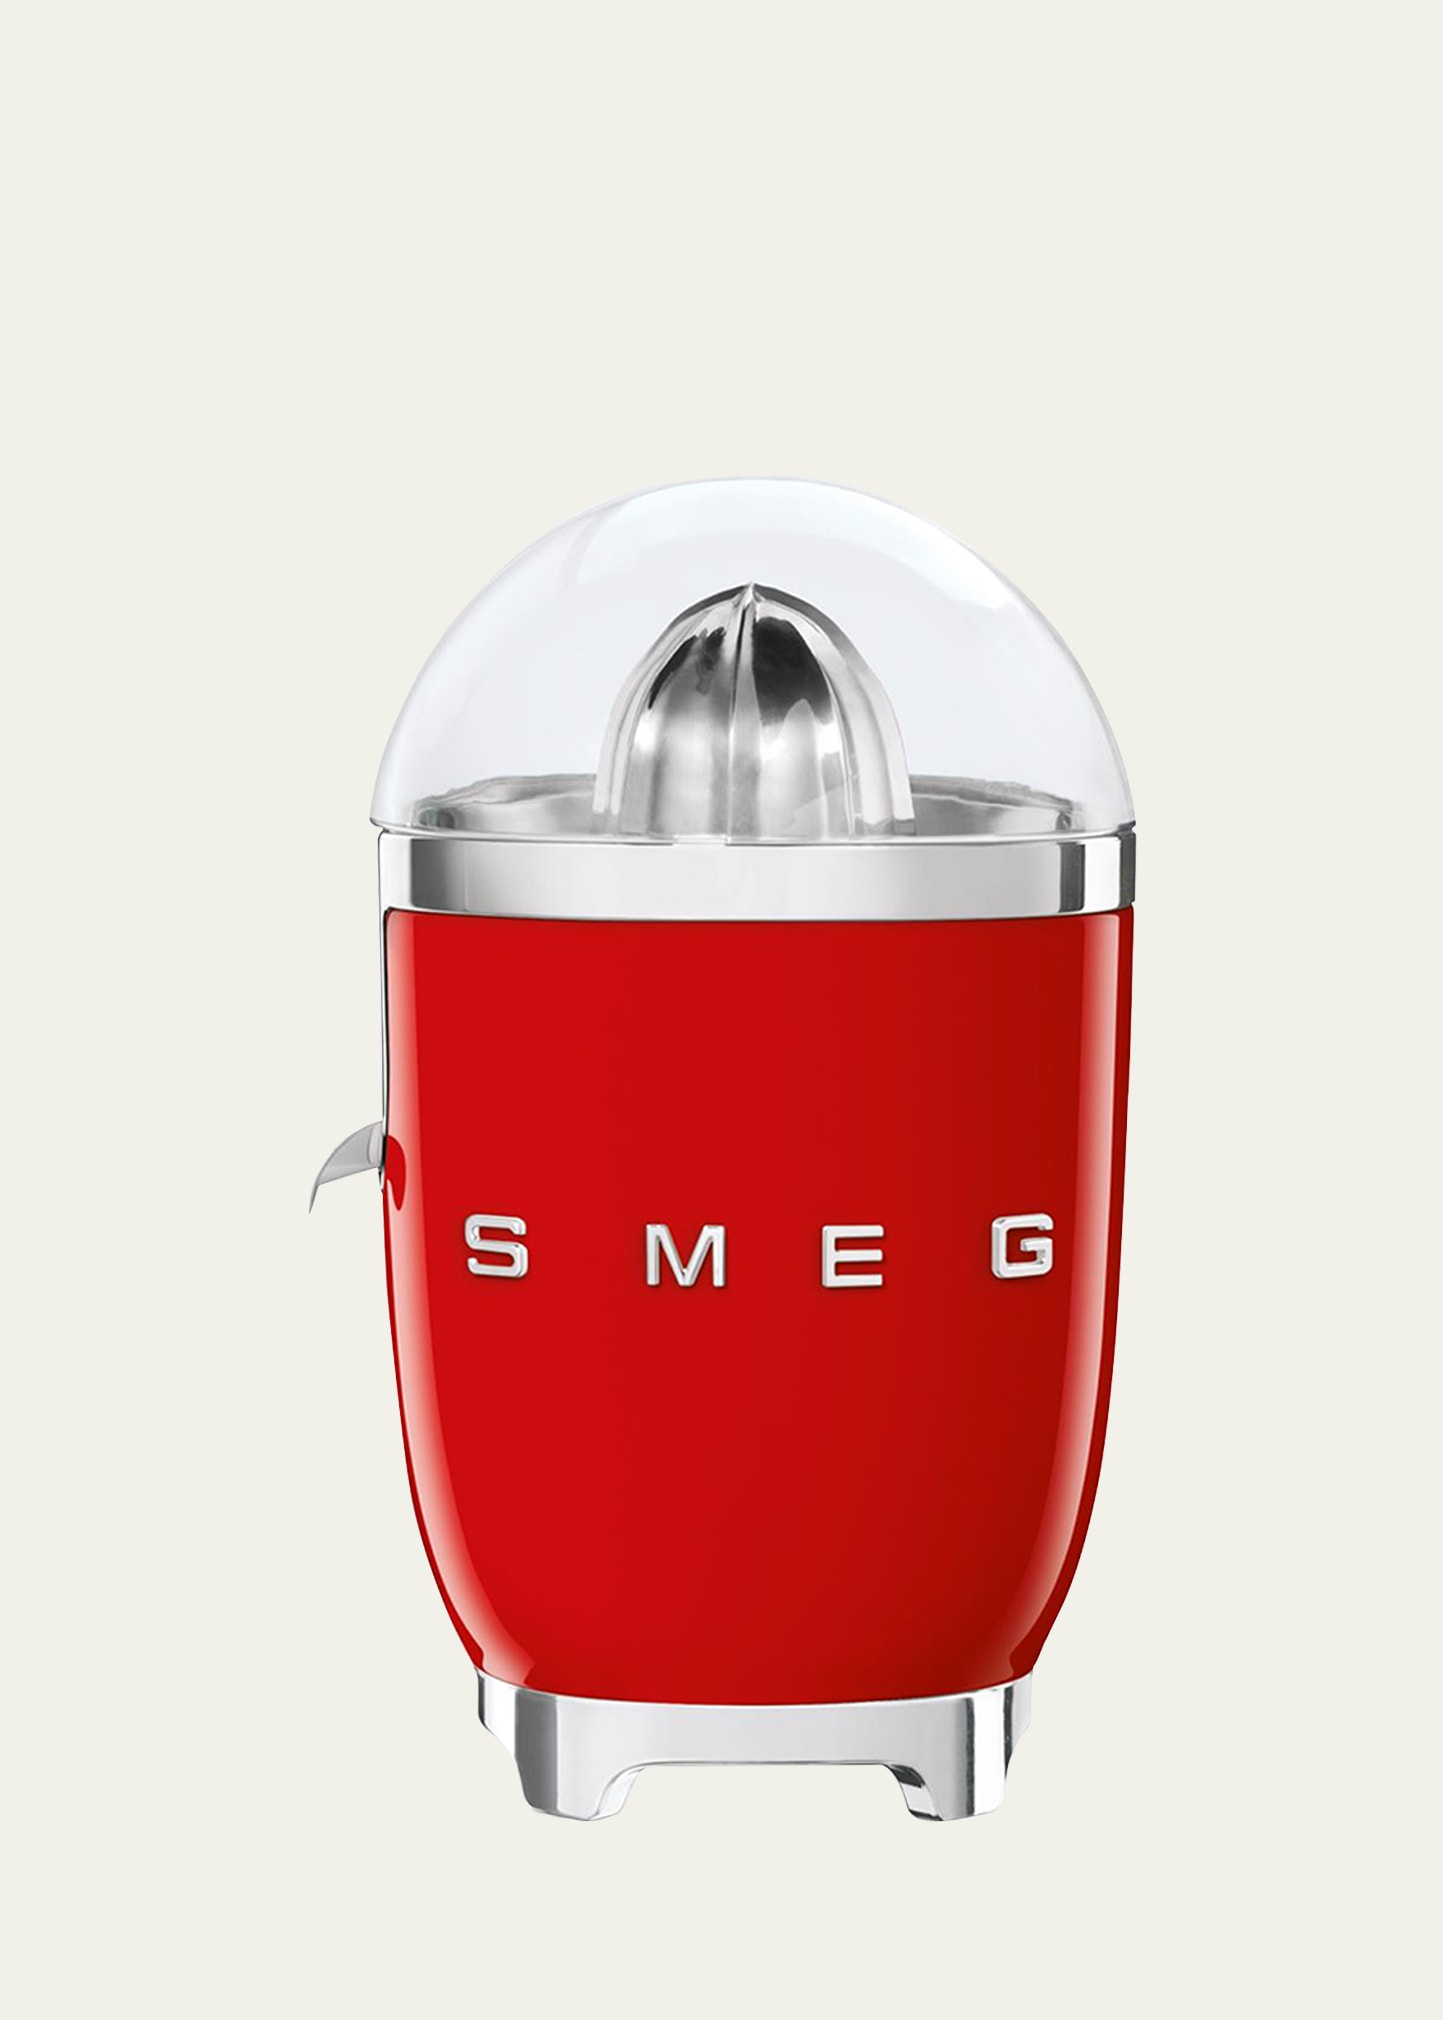 Smeg Retro-style Electric Citrus Juicer In Red